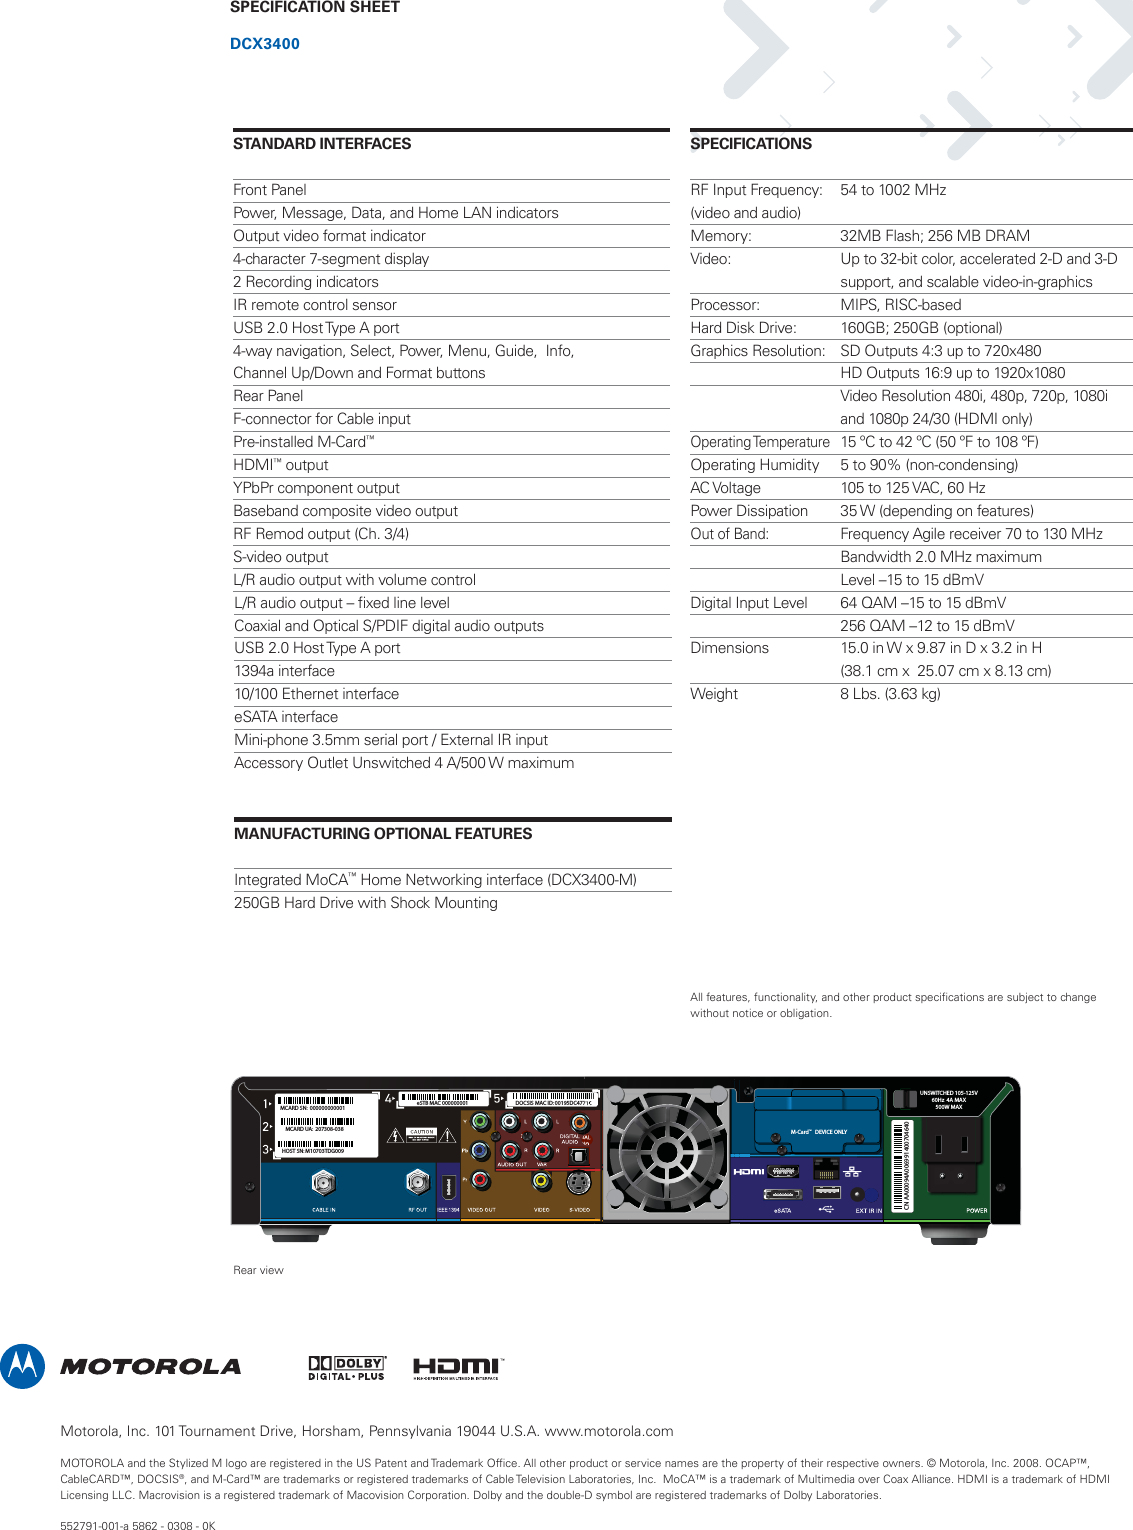 Page 2 of 2 - Arris DCX3400 User Manual Specifications DCX3400+Data+Sheet.unlocked